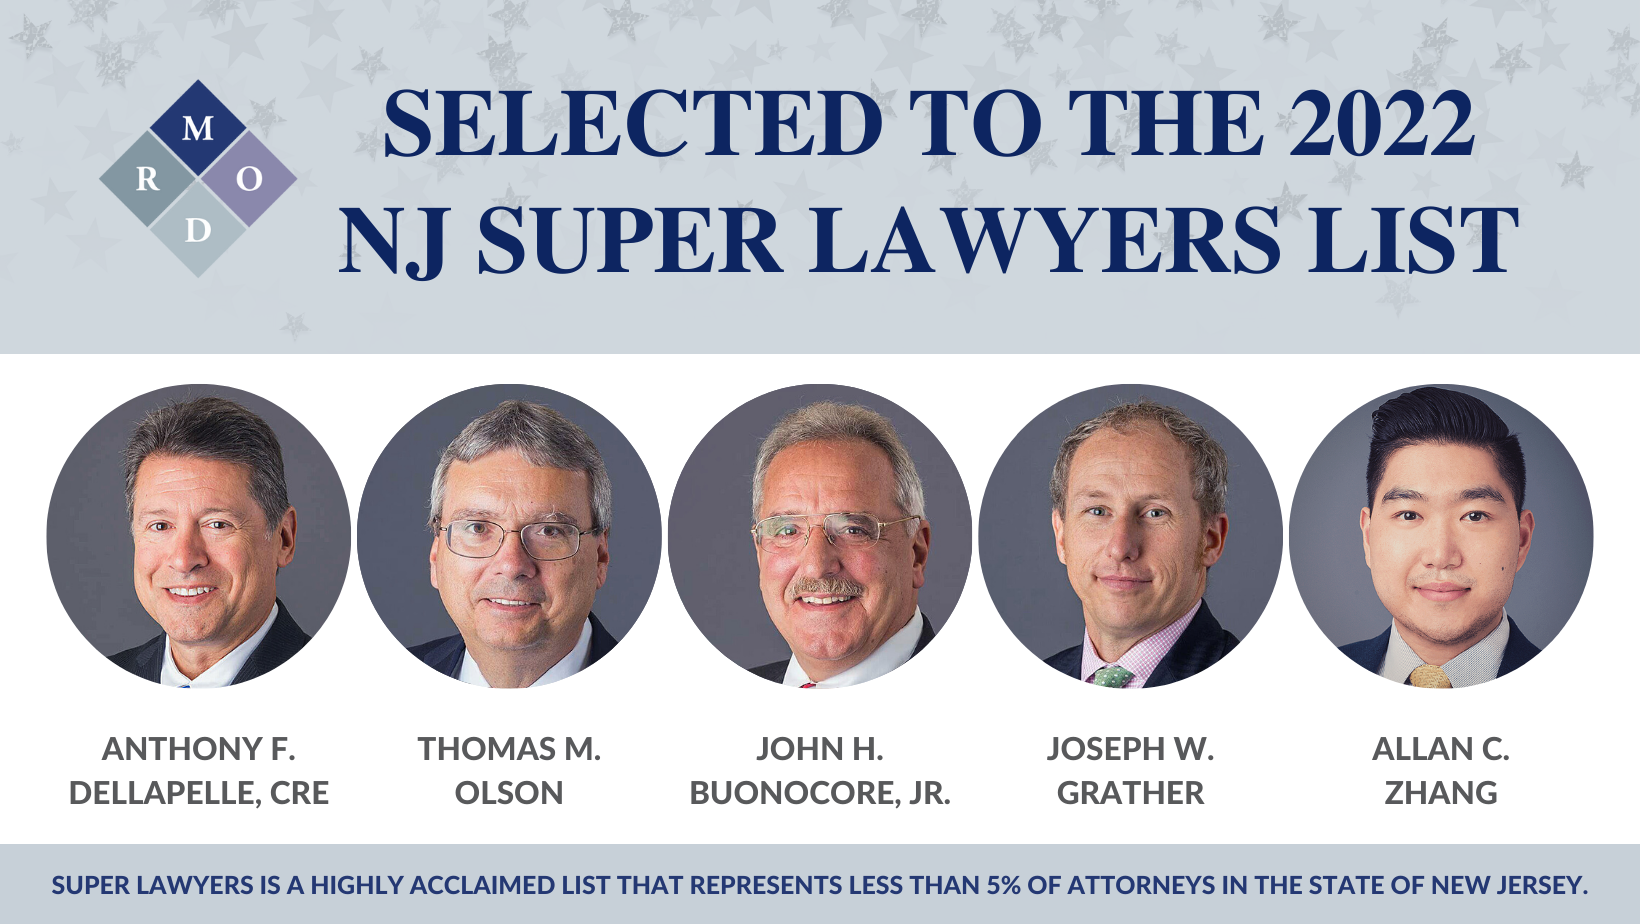 5 MROD Attorneys Selected For Inclusion On 2022 NJ Super Lawyers List